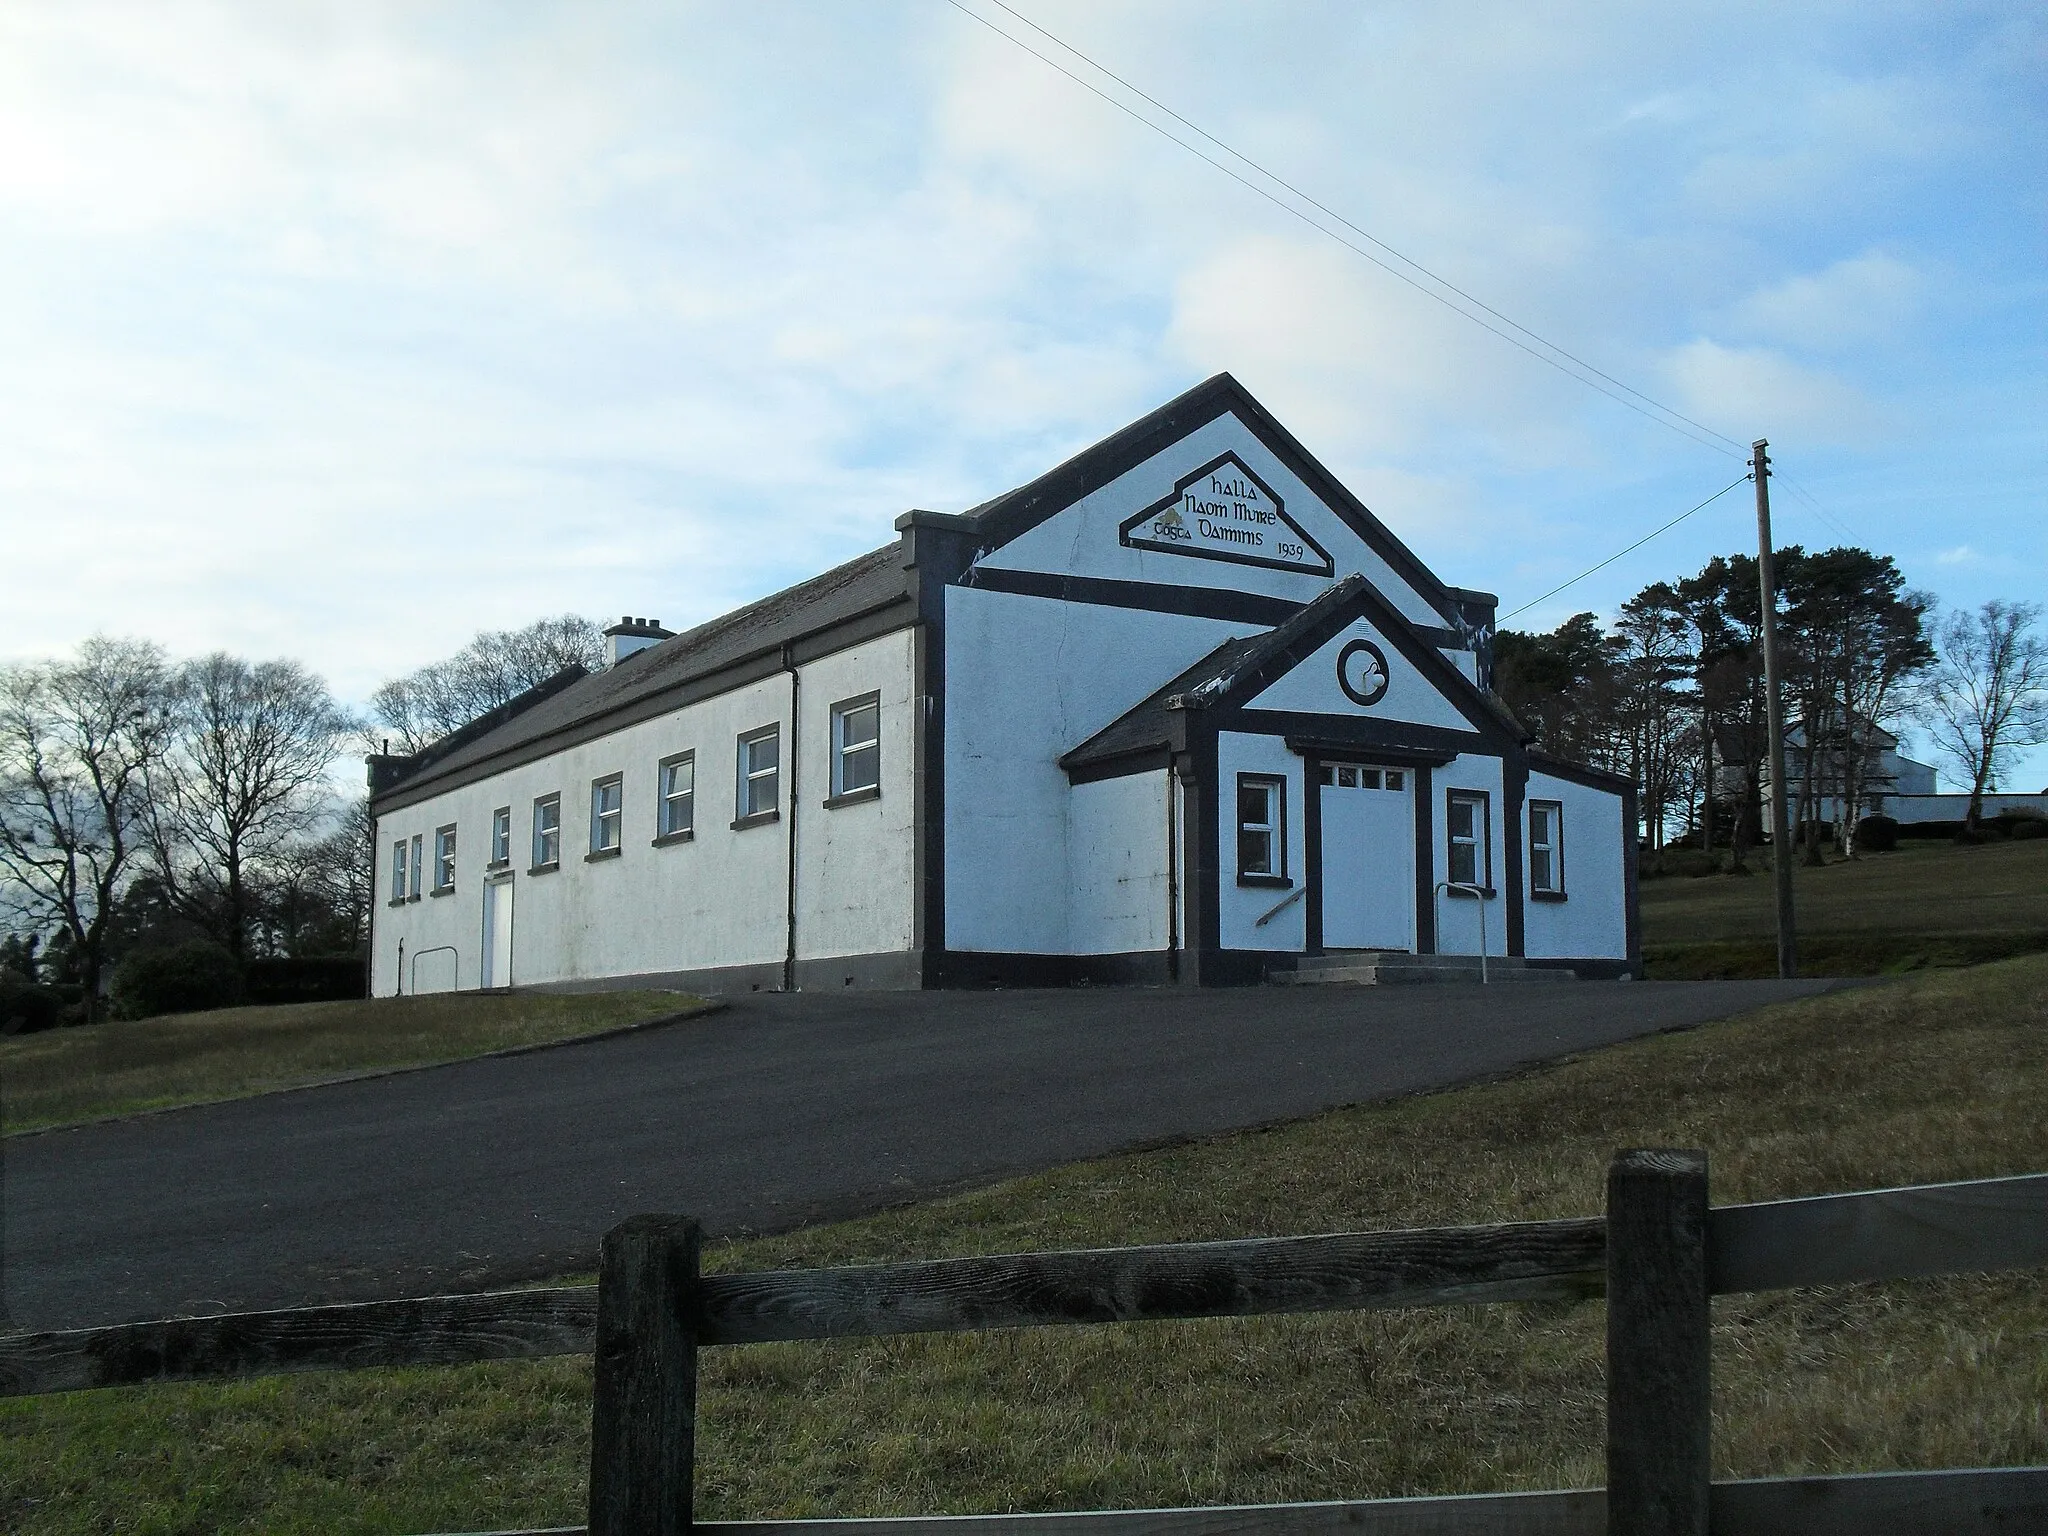 Photo showing: Halla Naomh Mhuire, Garrison In English "St. Mary's Hall". Located in the townland of Knockarevan, beside the Roman Catholic church (Our Lady Queen of Peace).